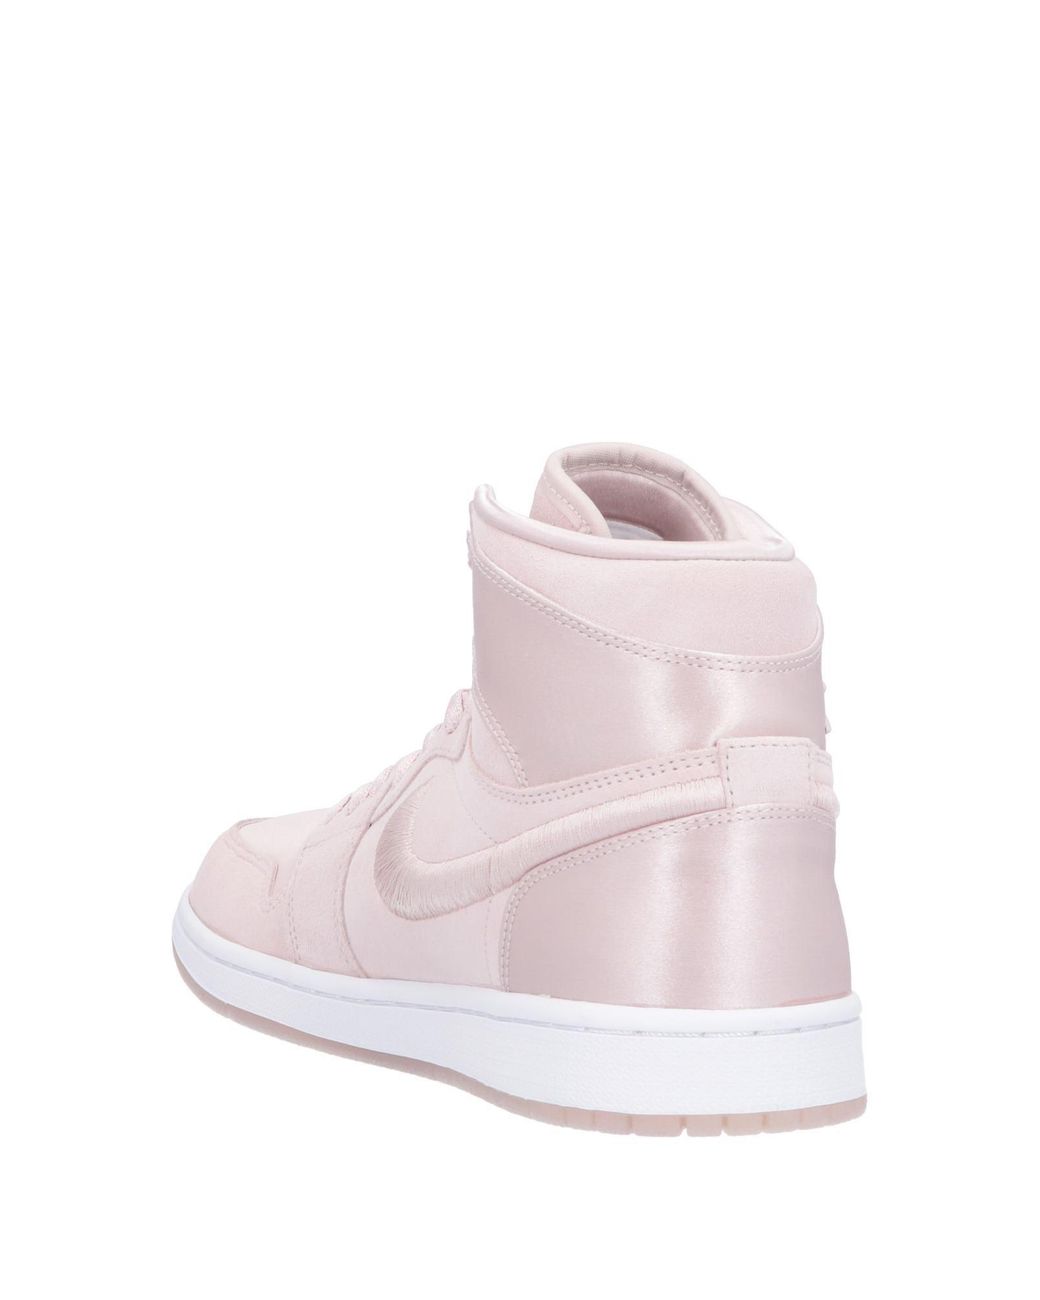 Nike Satin High-tops & Sneakers in Light Pink (Pink) | Lyst